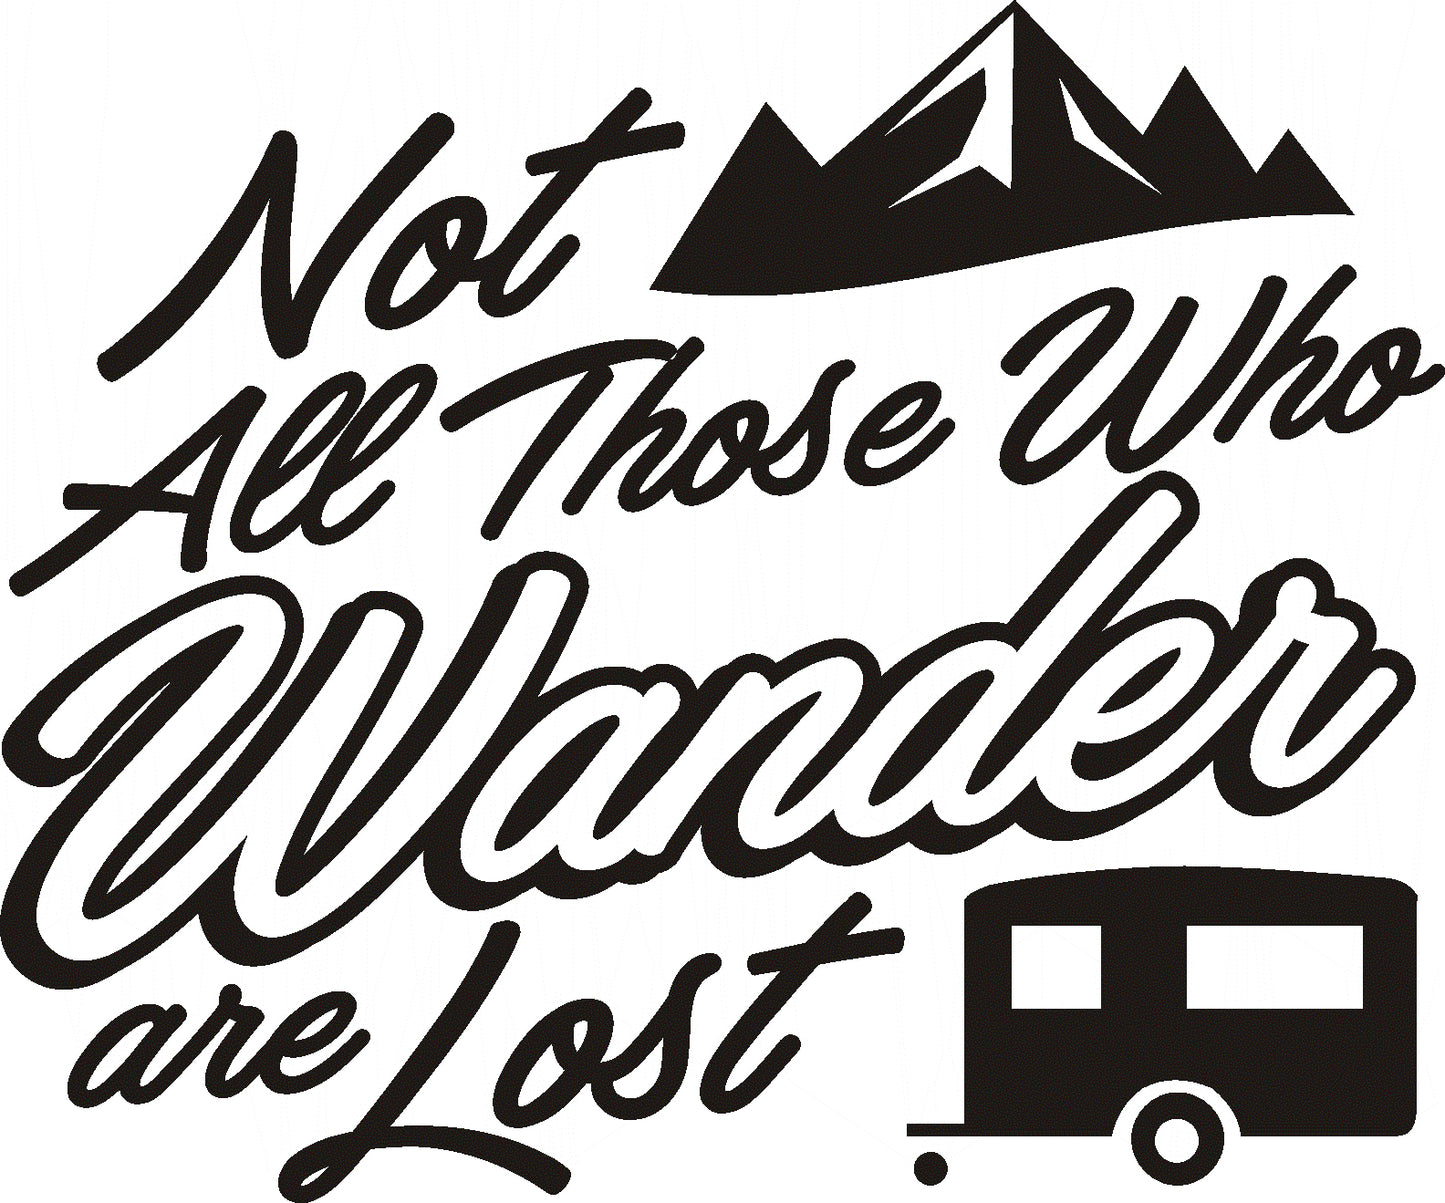 Not All Those Who Wander Are Lost Vinyl Sticker Decal Graphic | RV Slide Decal RV Door Decal Travel Trailer Camper 5th wheel stickers